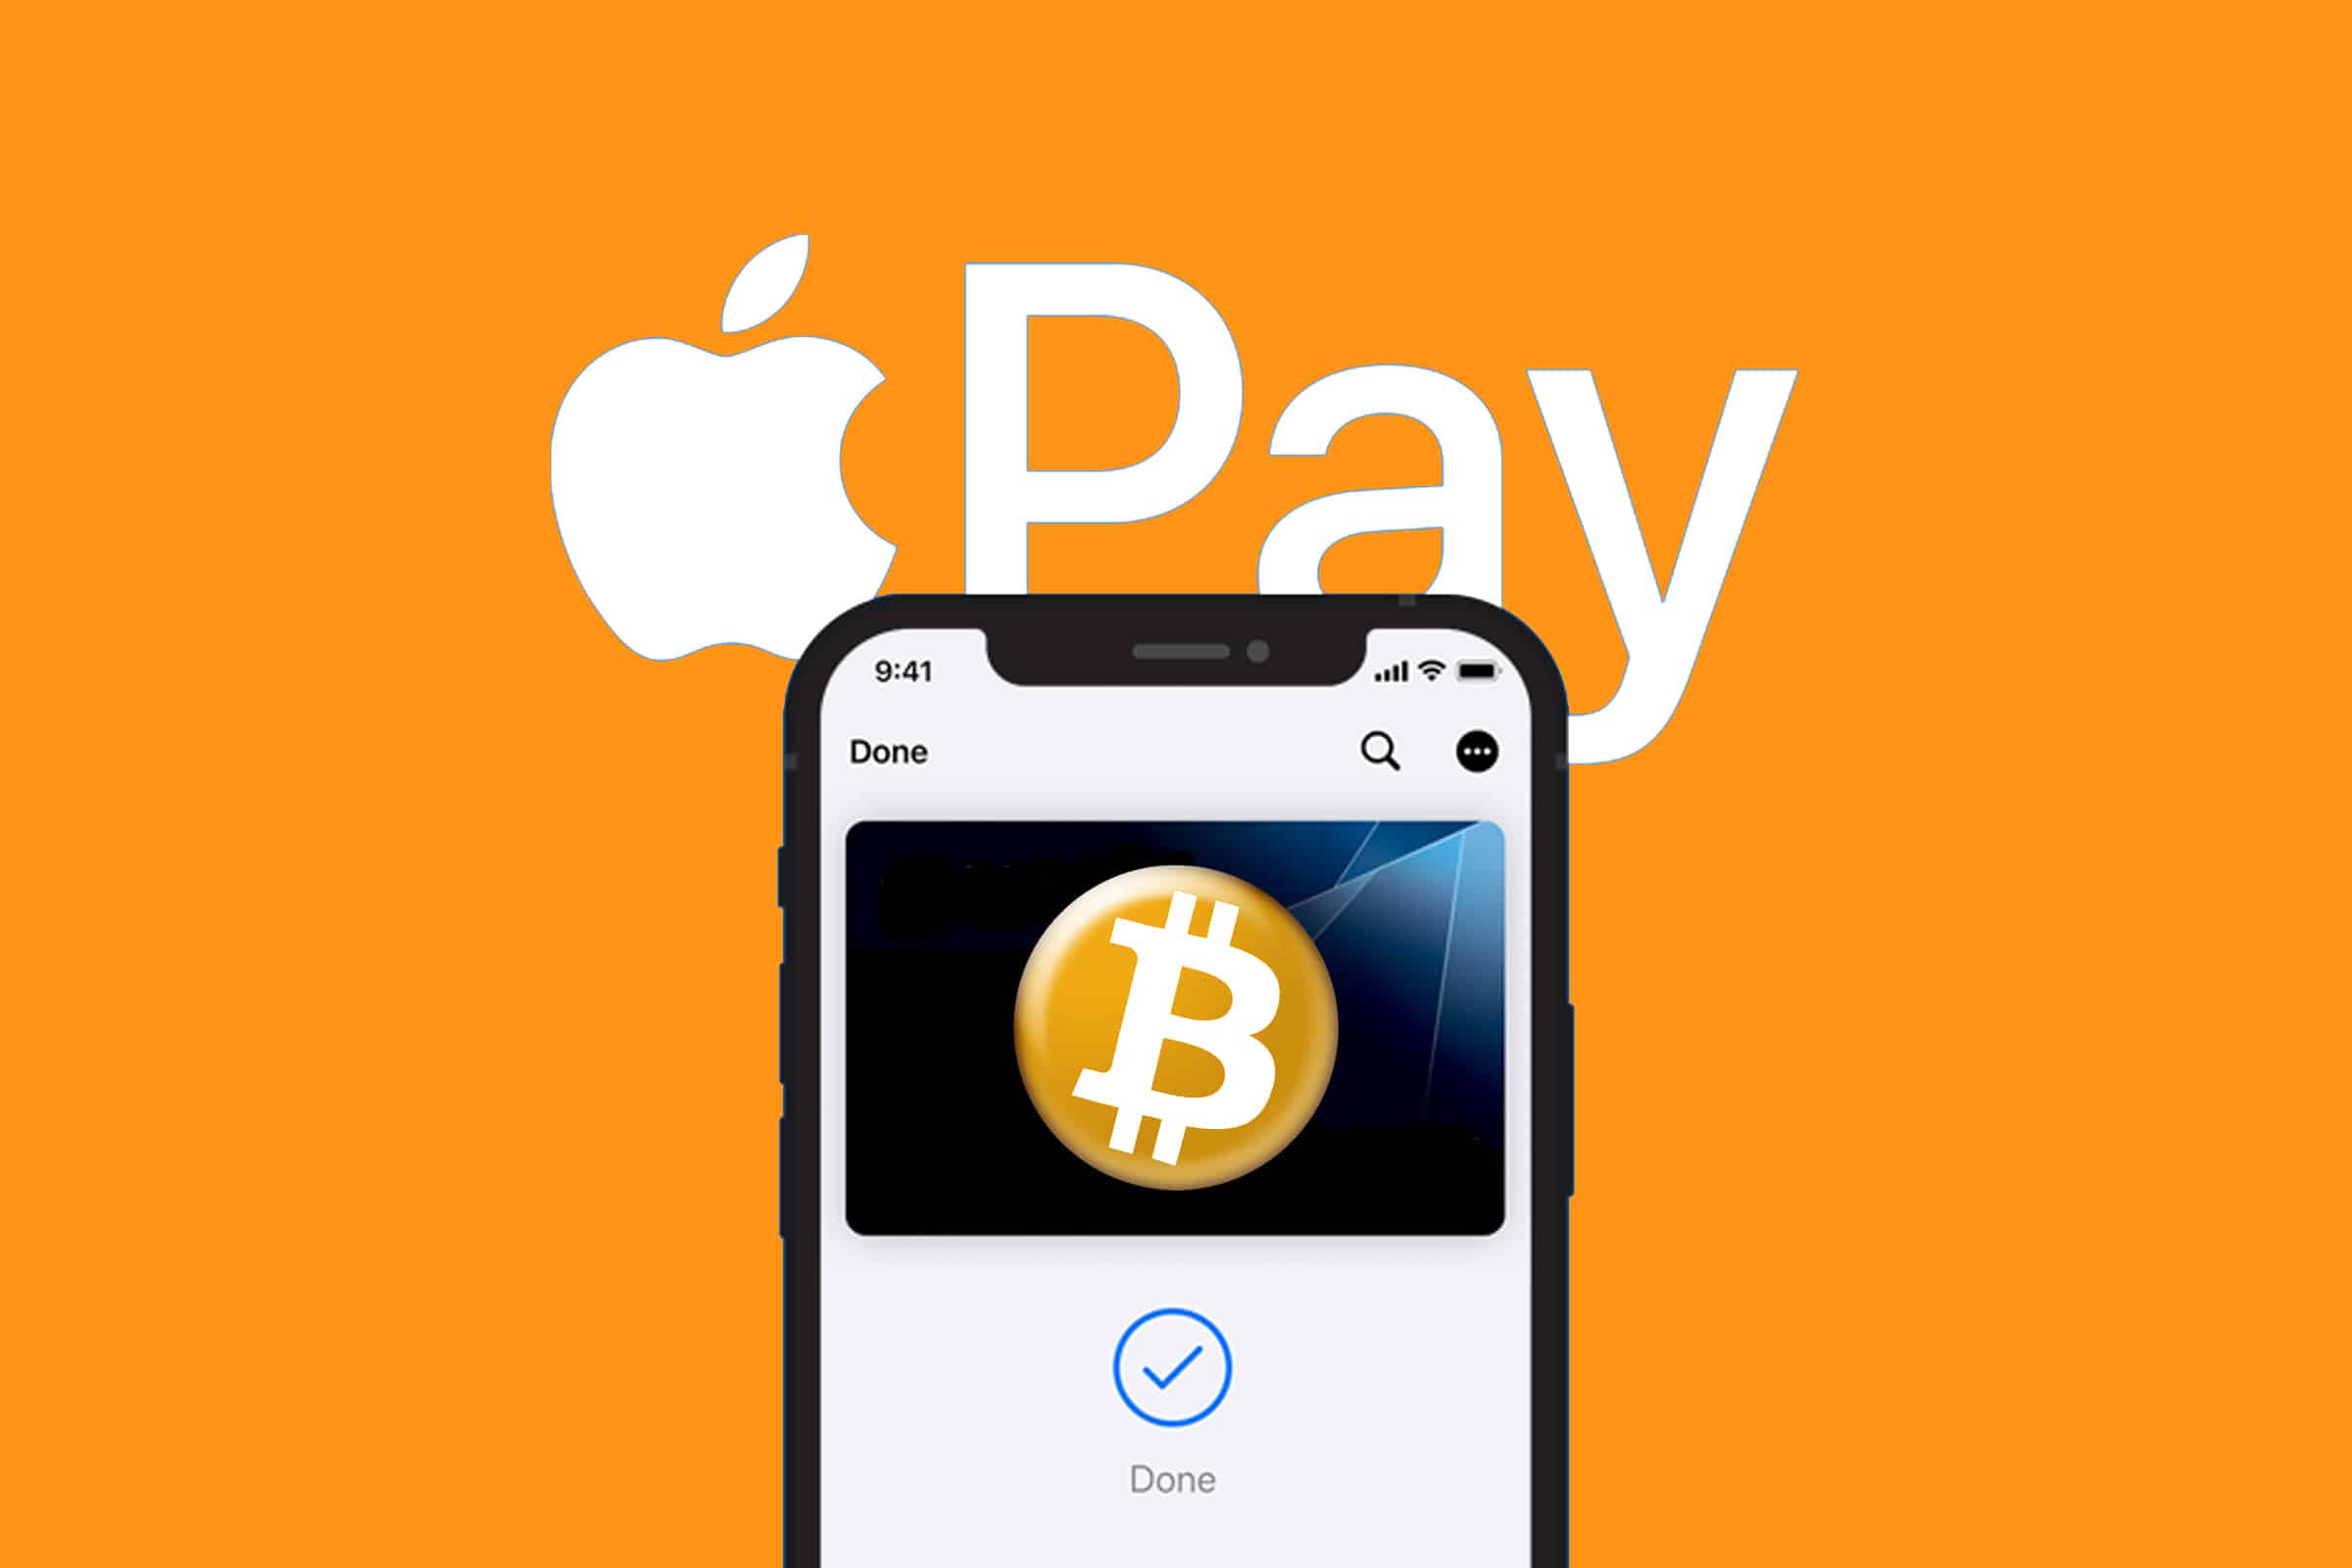 Apple's upcoming tap and pay feature will allow merchants to accept crypto